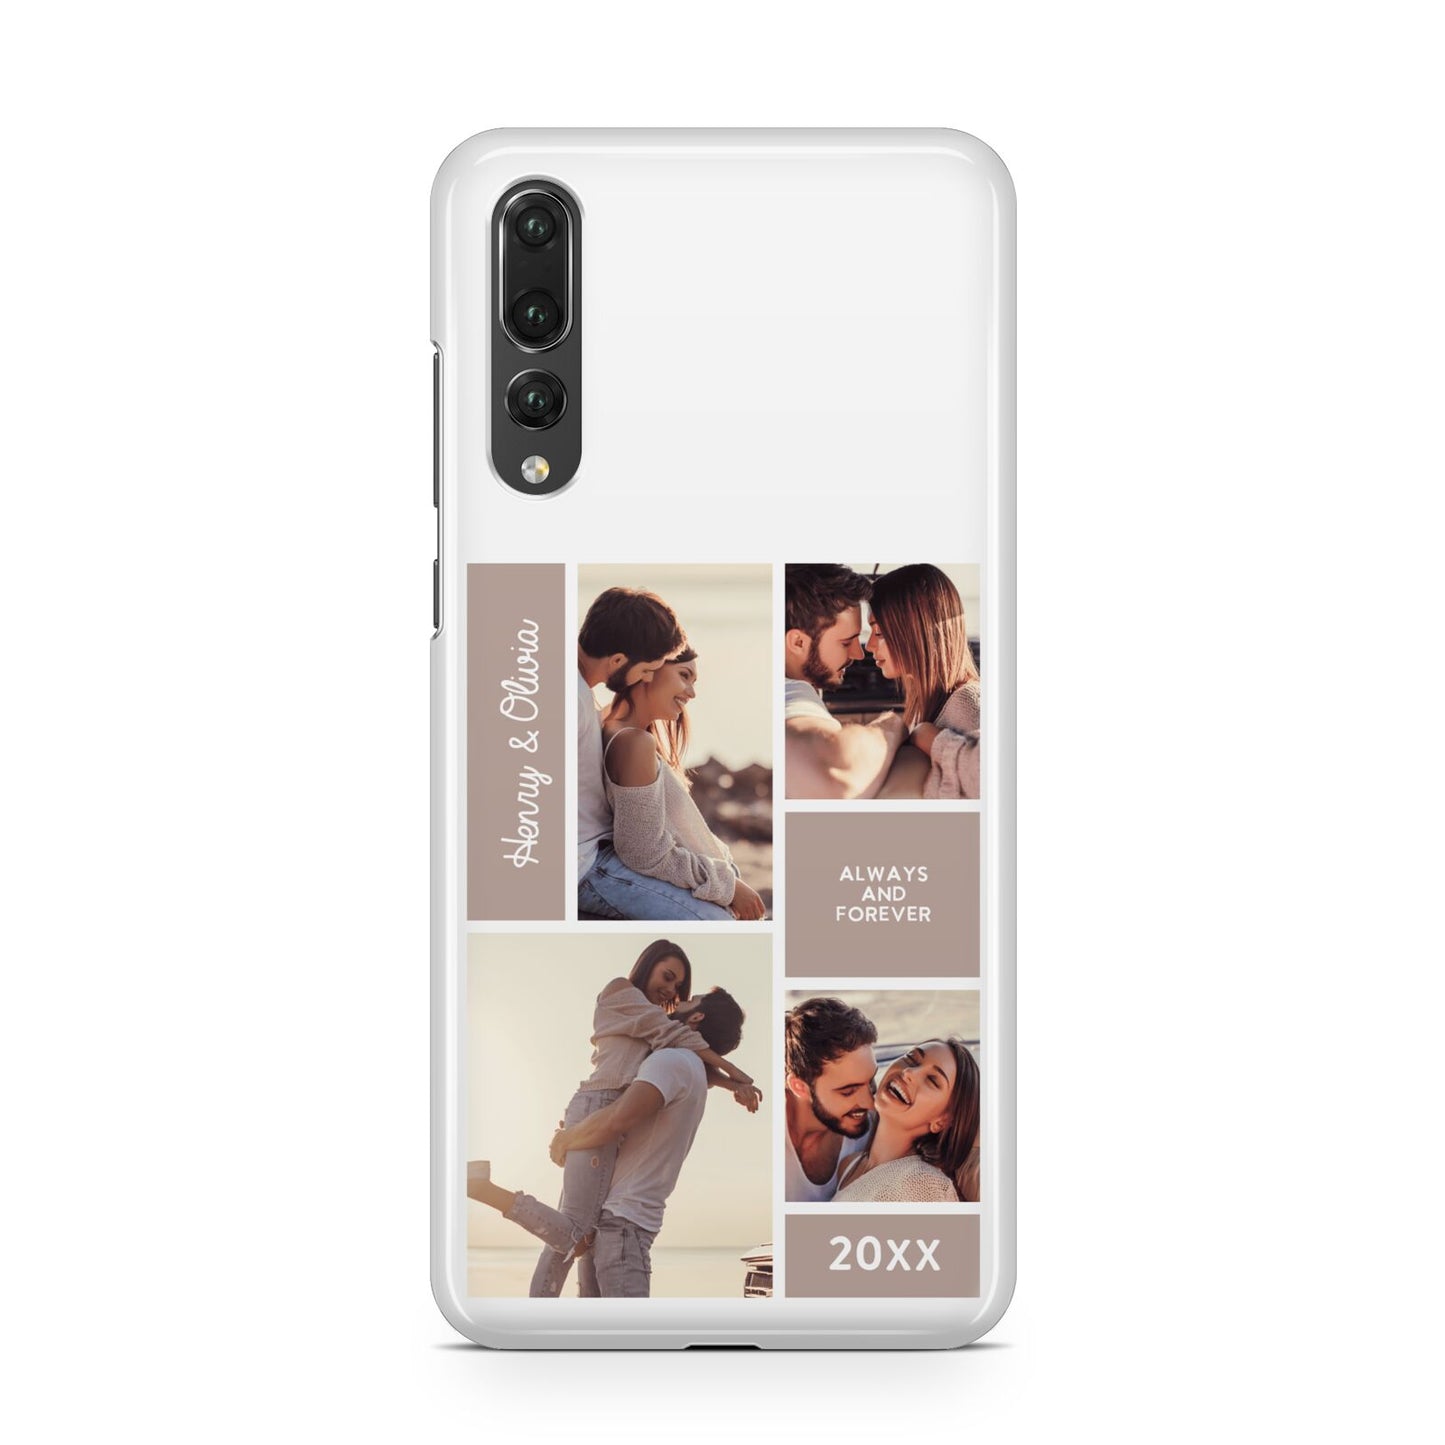 Couples Valentine Photo Collage Personalised Huawei P20 Pro Phone Case